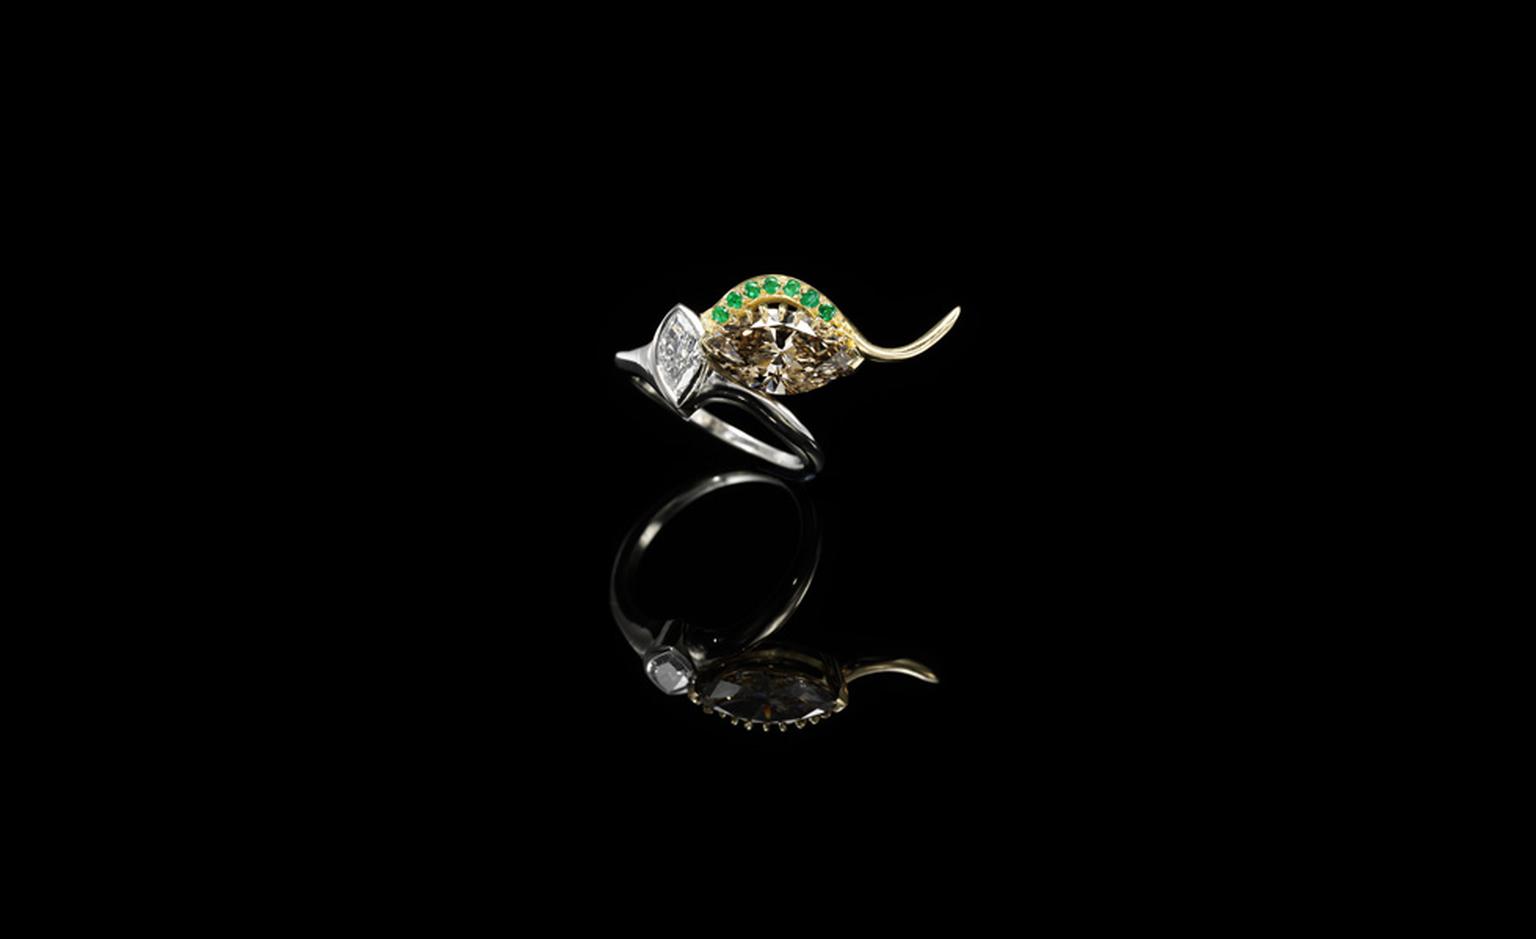 Jessica McCormack, Envy ring, yellow and white gold, set with a marquise-shaped diamond held by yellow gold ‘lashes’ highlighted by pave set emeralds £26,000